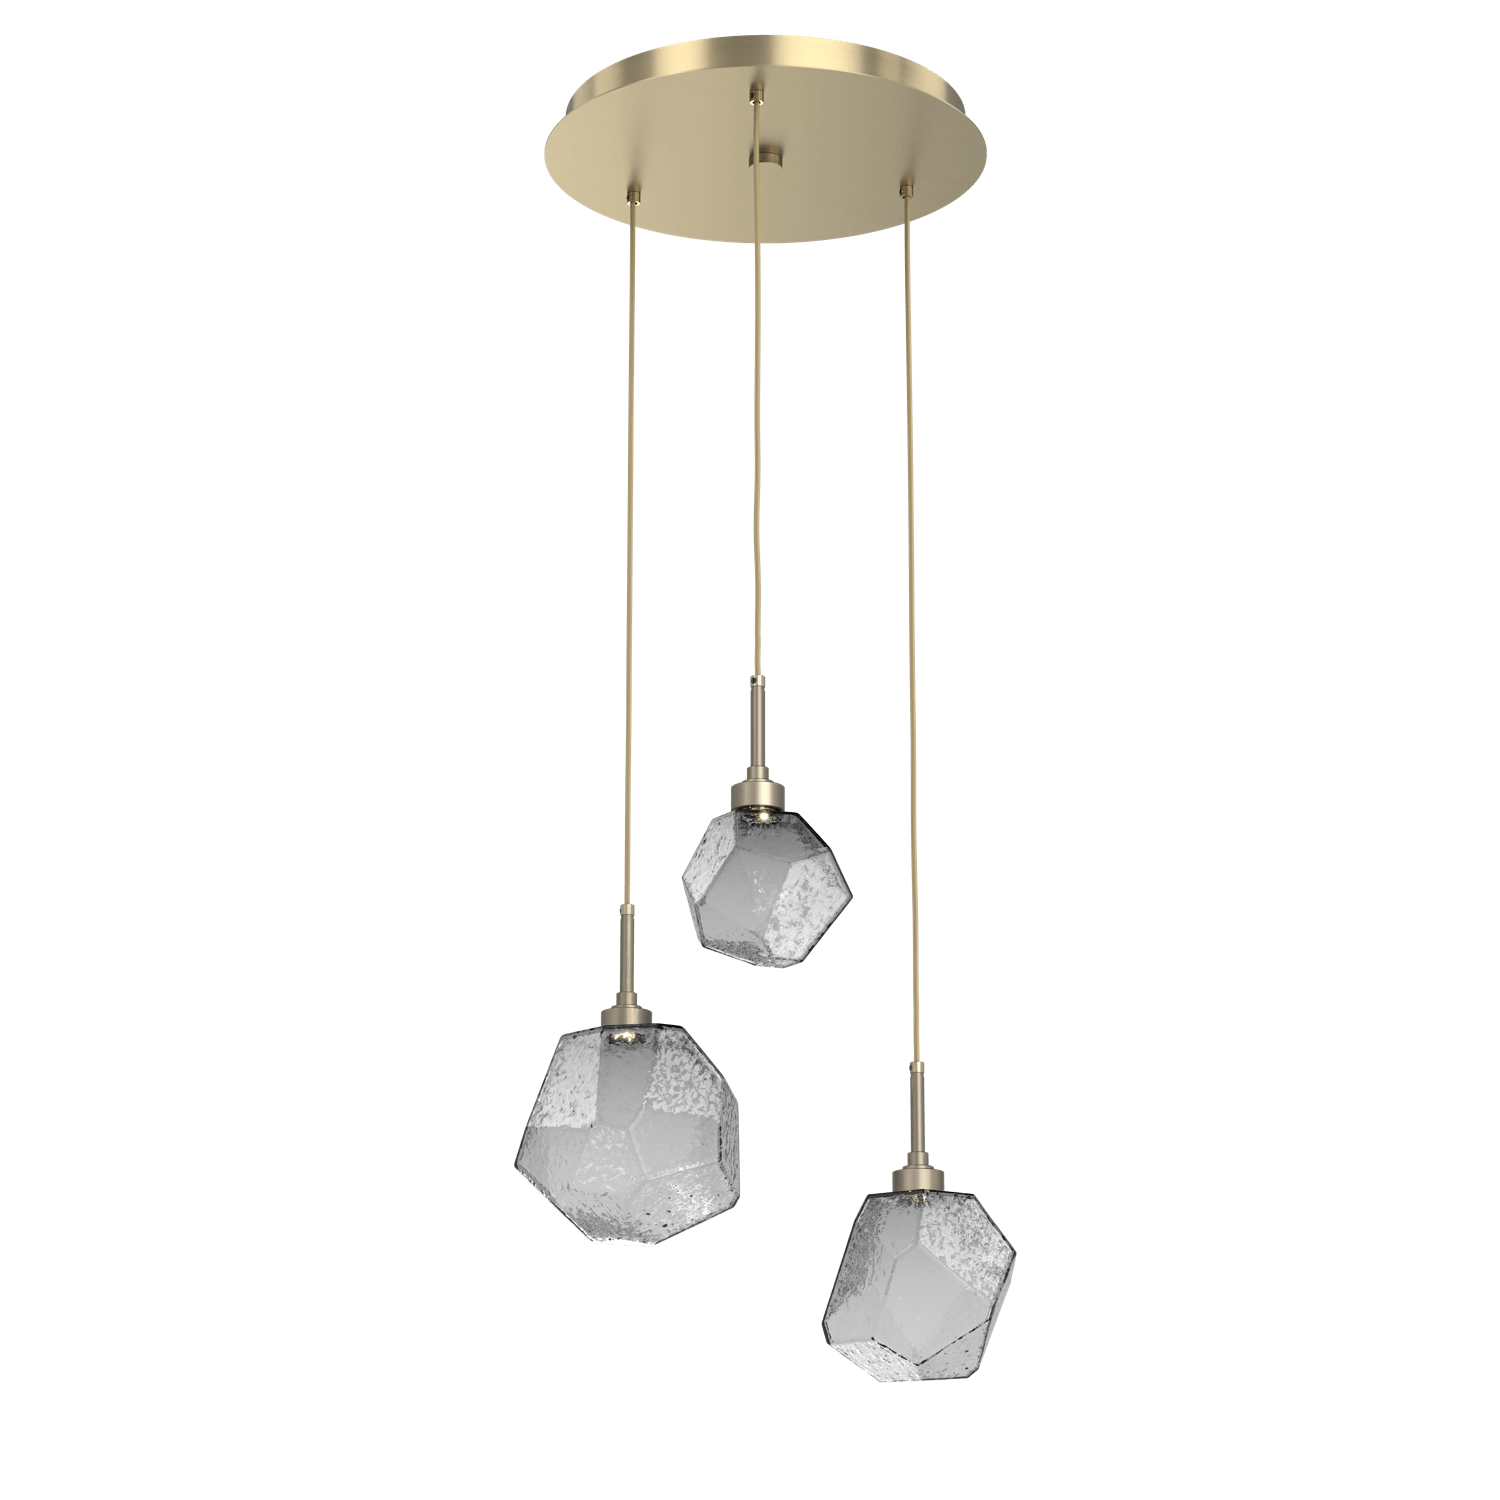 CHB0039-03-HB-S-Hammerton-Studio-Gem-3-light-round-pendant-chandelier-with-heritage-brass-finish-and-smoke-blown-glass-shades-and-LED-lamping